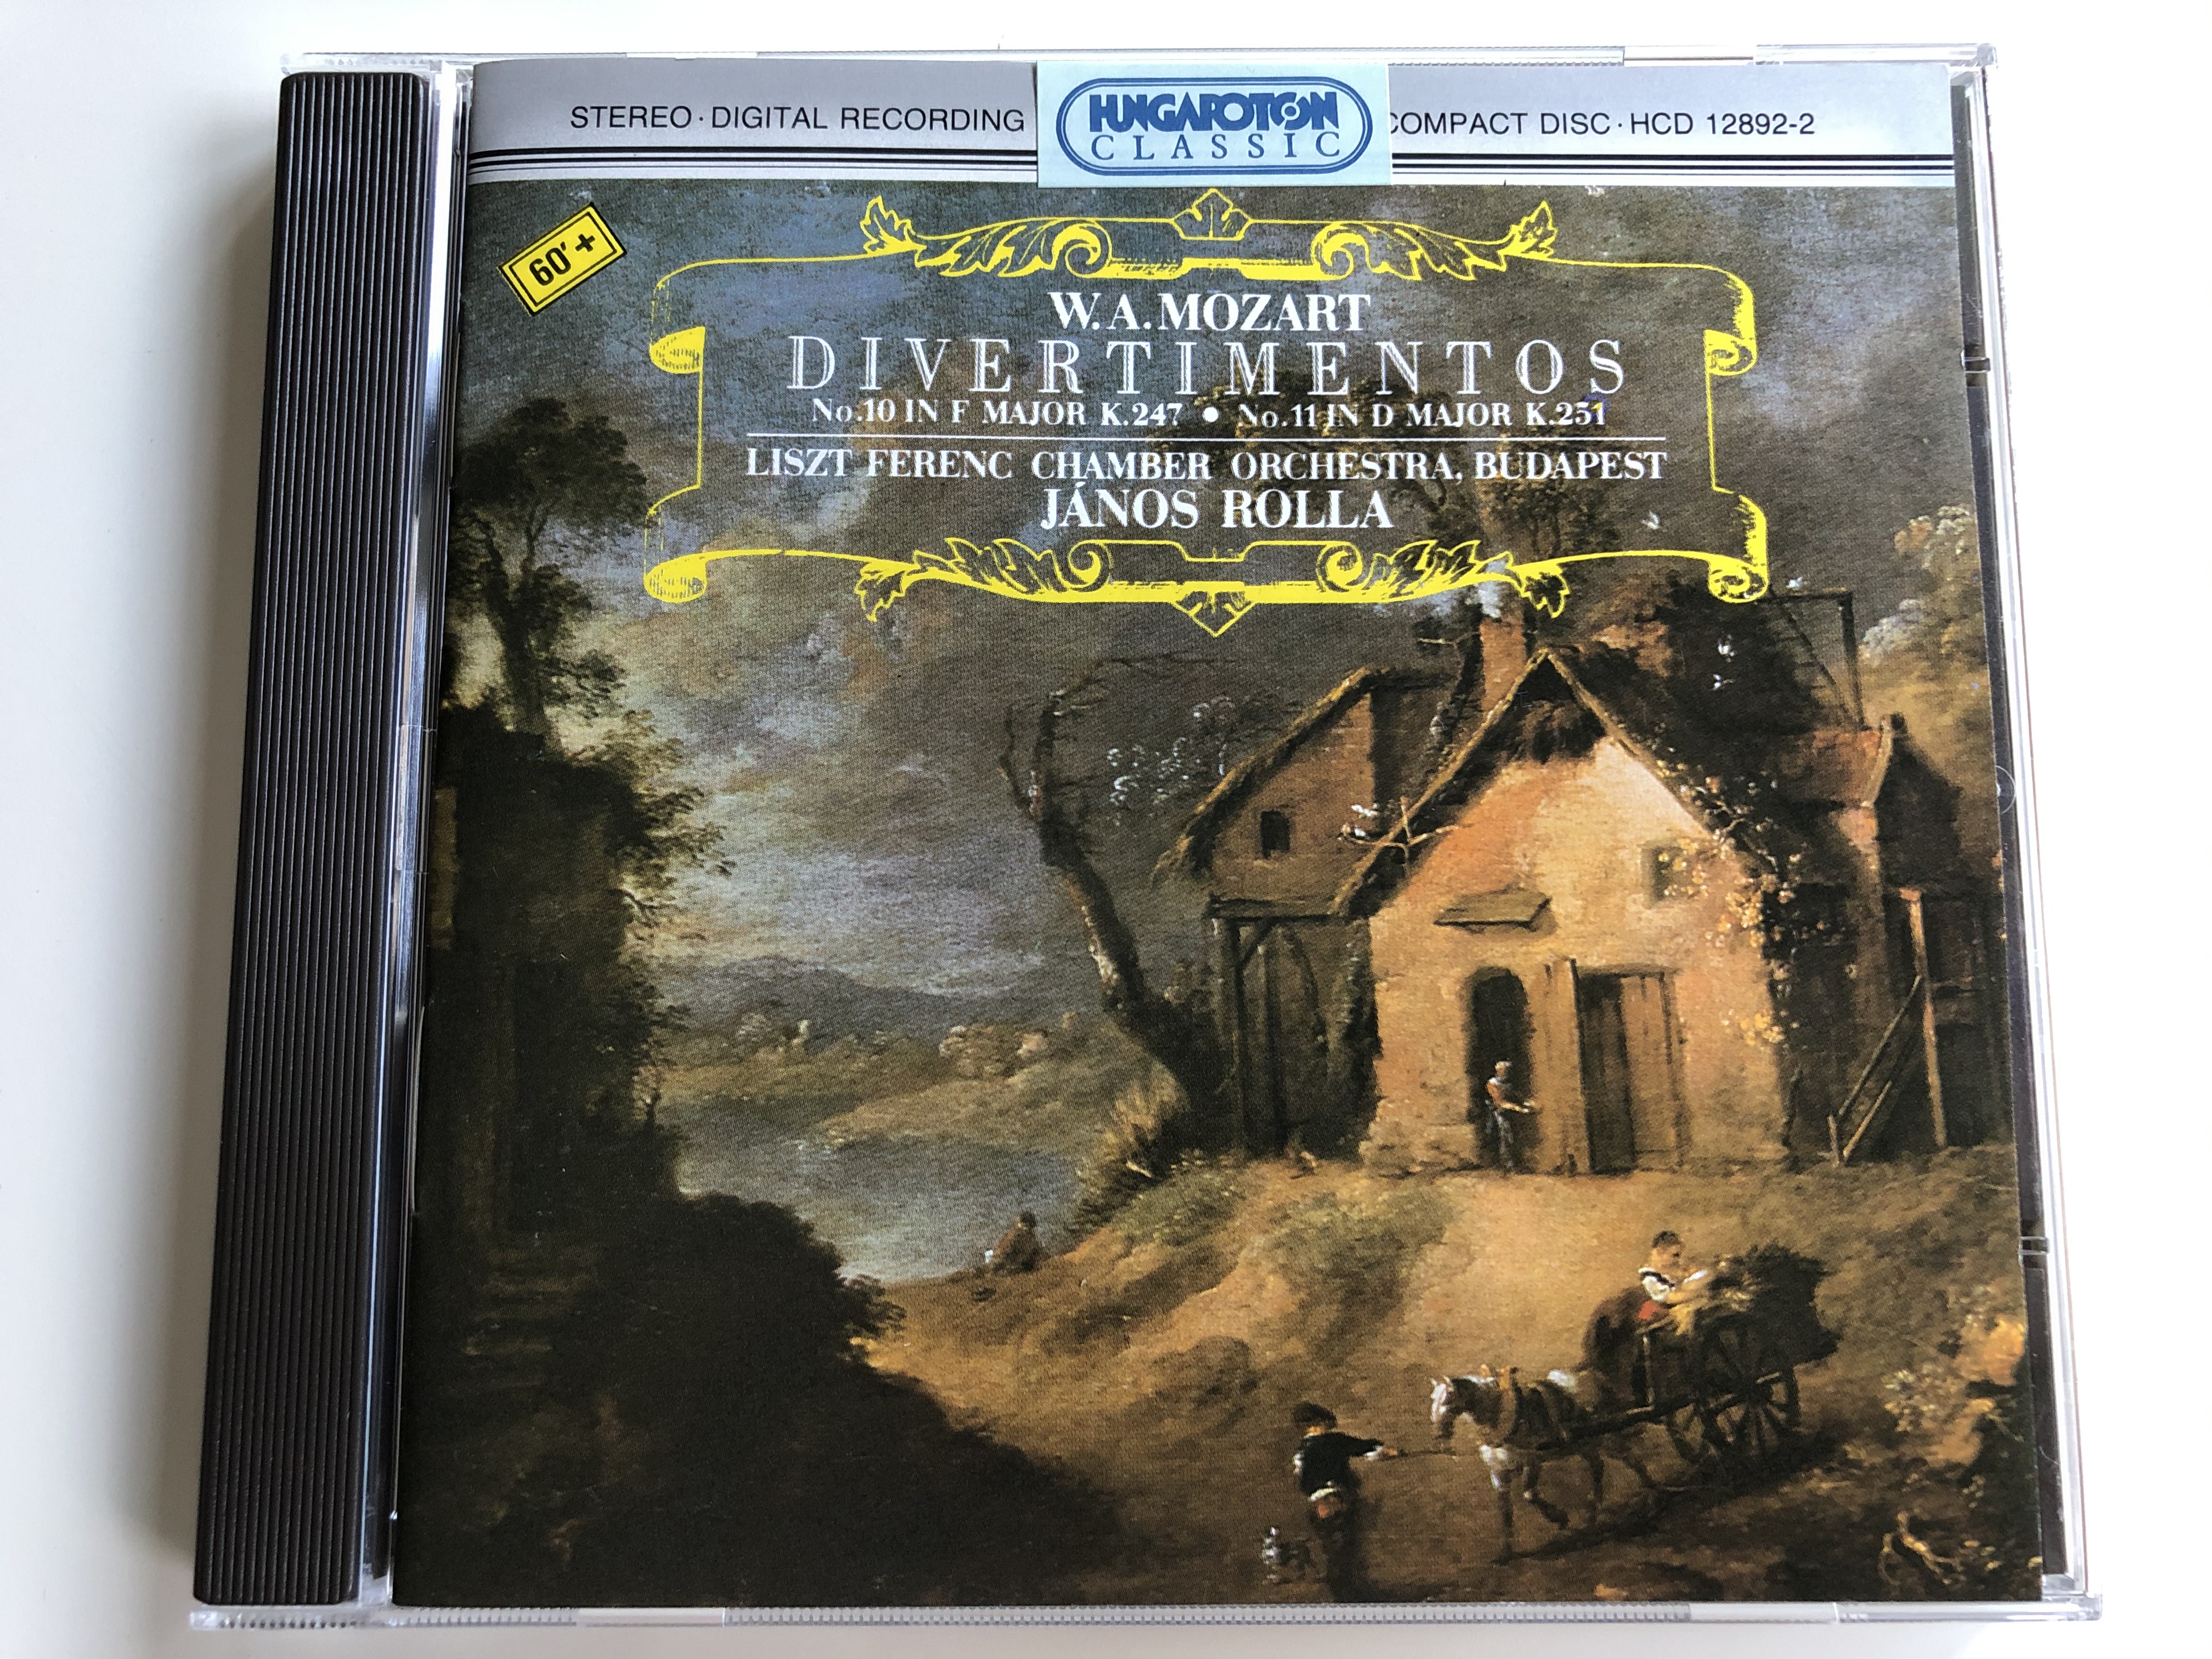 w.-a.-mozart-divertimentos-no.10-in-f-major-k.247-no.-11-in-d-major-k.251-liszt-ferenc-chamber-orchestra-budapest-janos-rolla-hungaroton-classic-audio-cd-1995-stereo-hcd-12892-2-1-.jpg